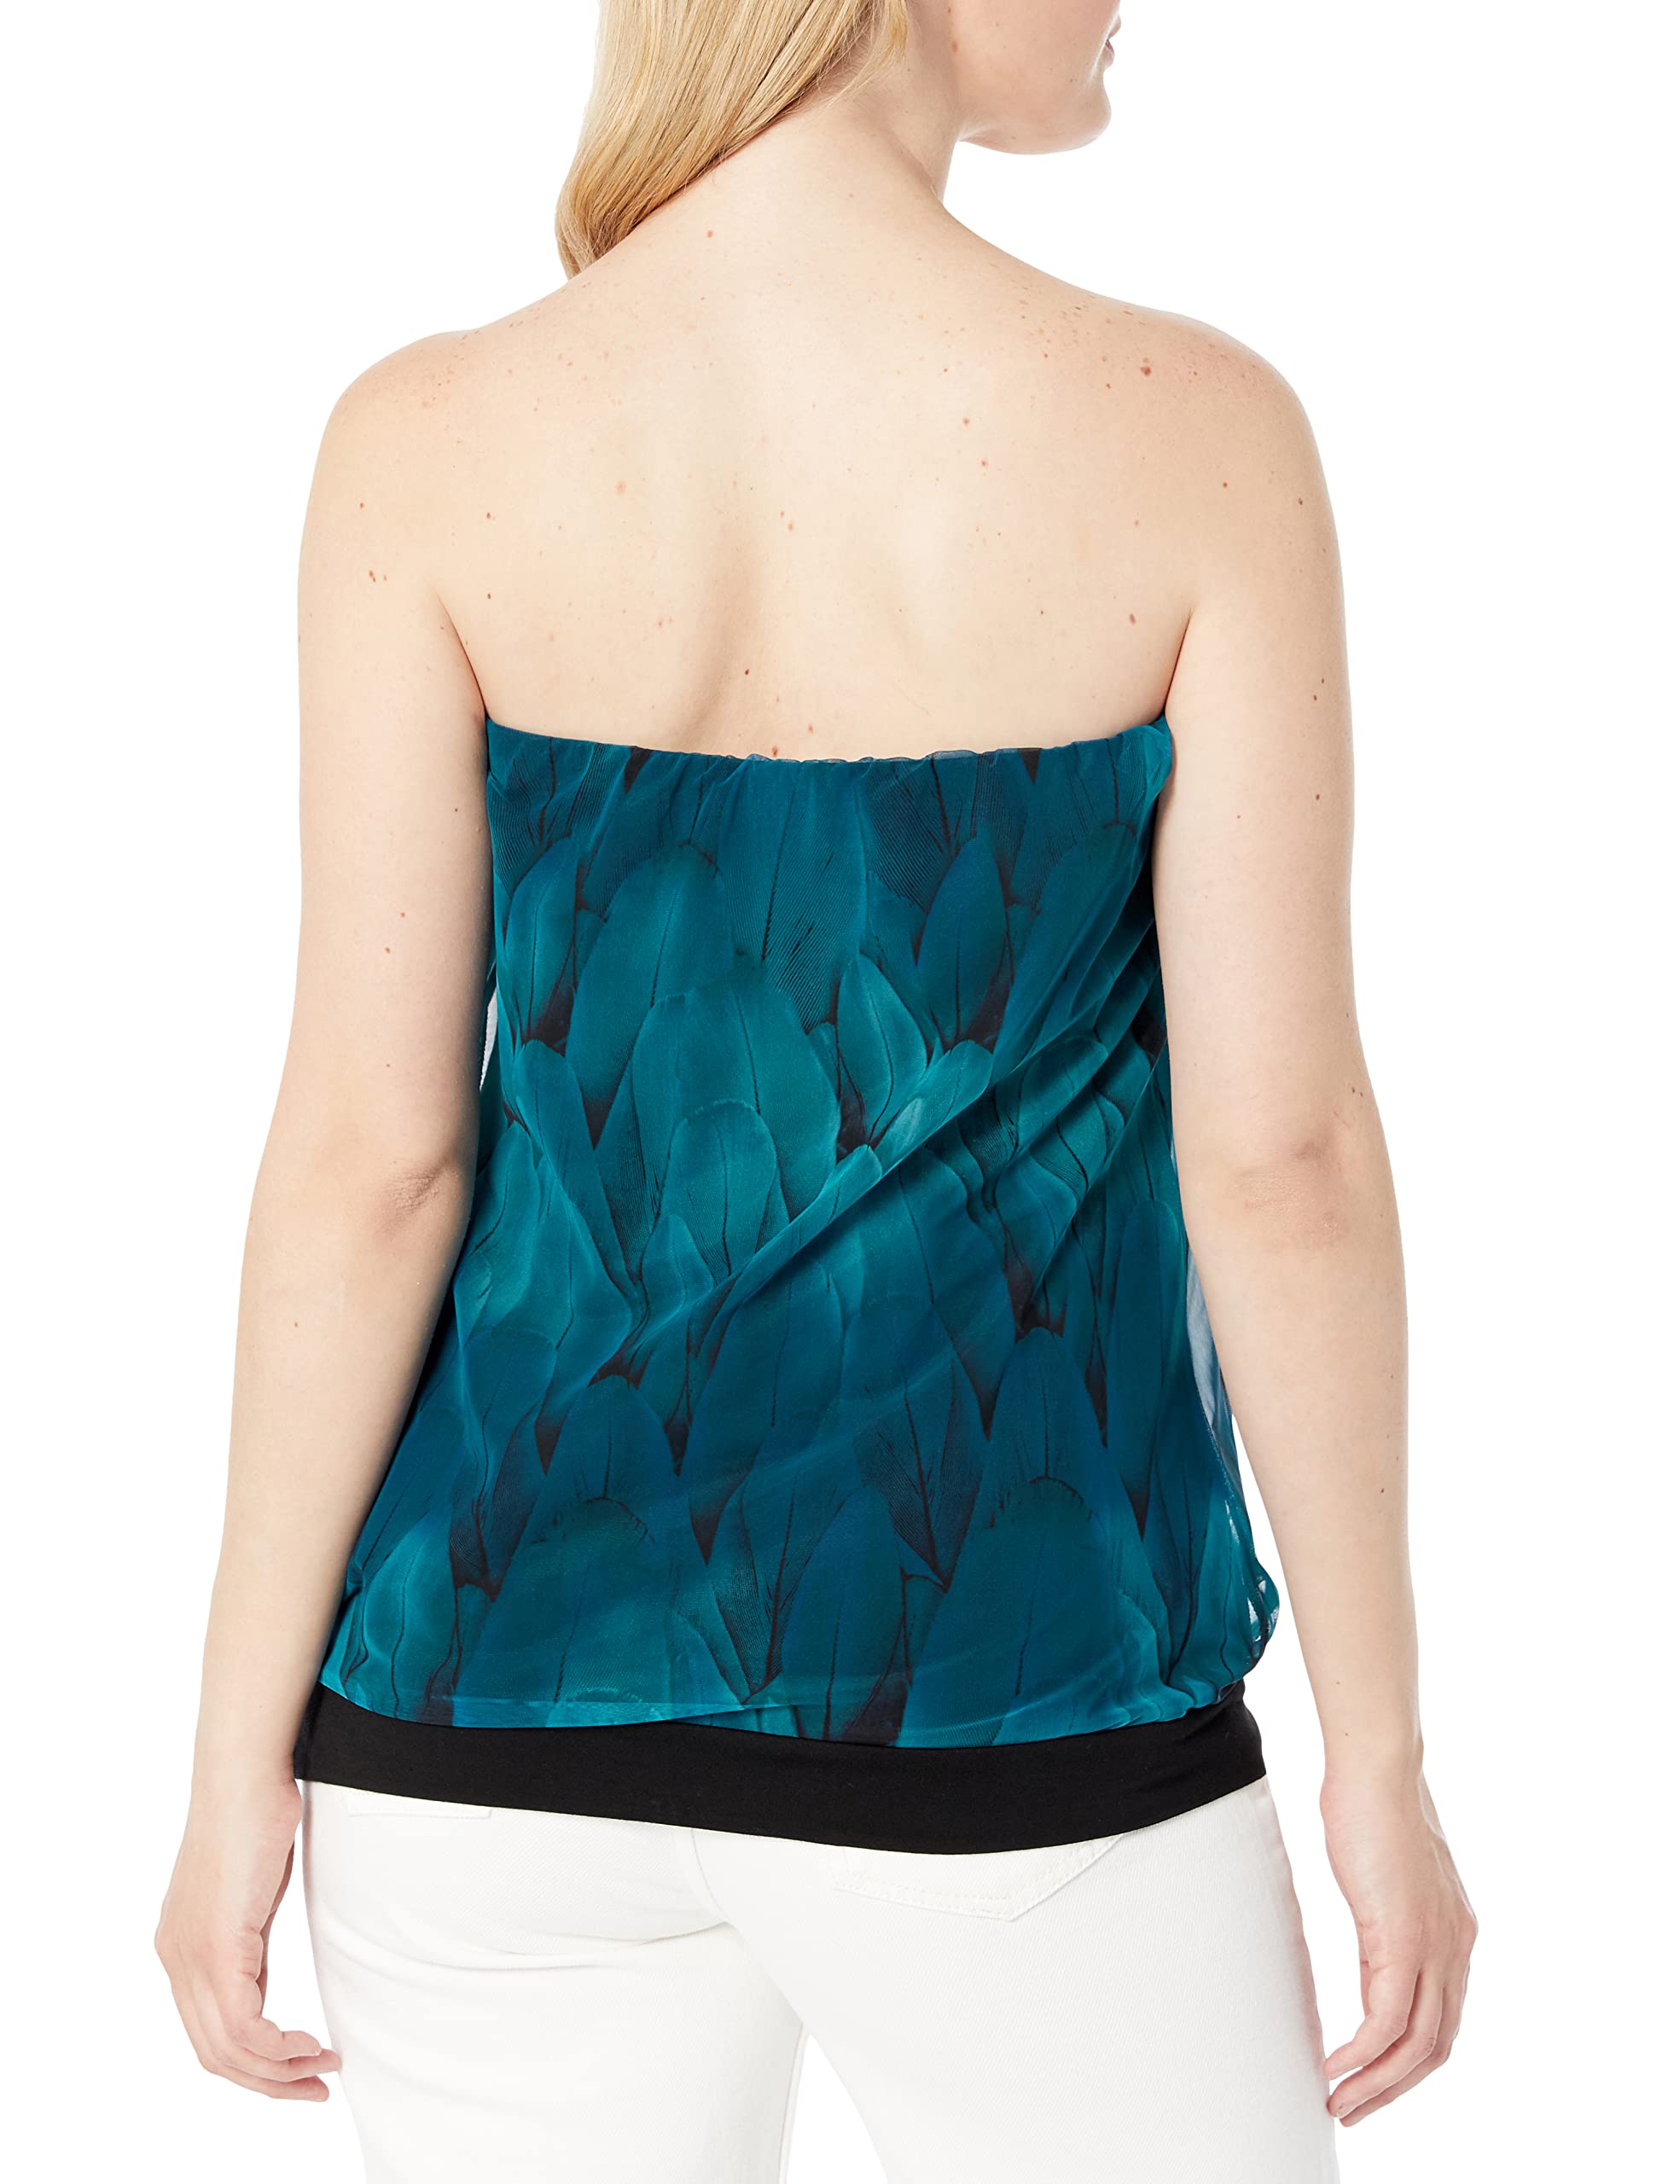 BAISHENGGT Peacock Blue Women's Sexy Sleeveless Mesh Blouse Pleated Tube Tops